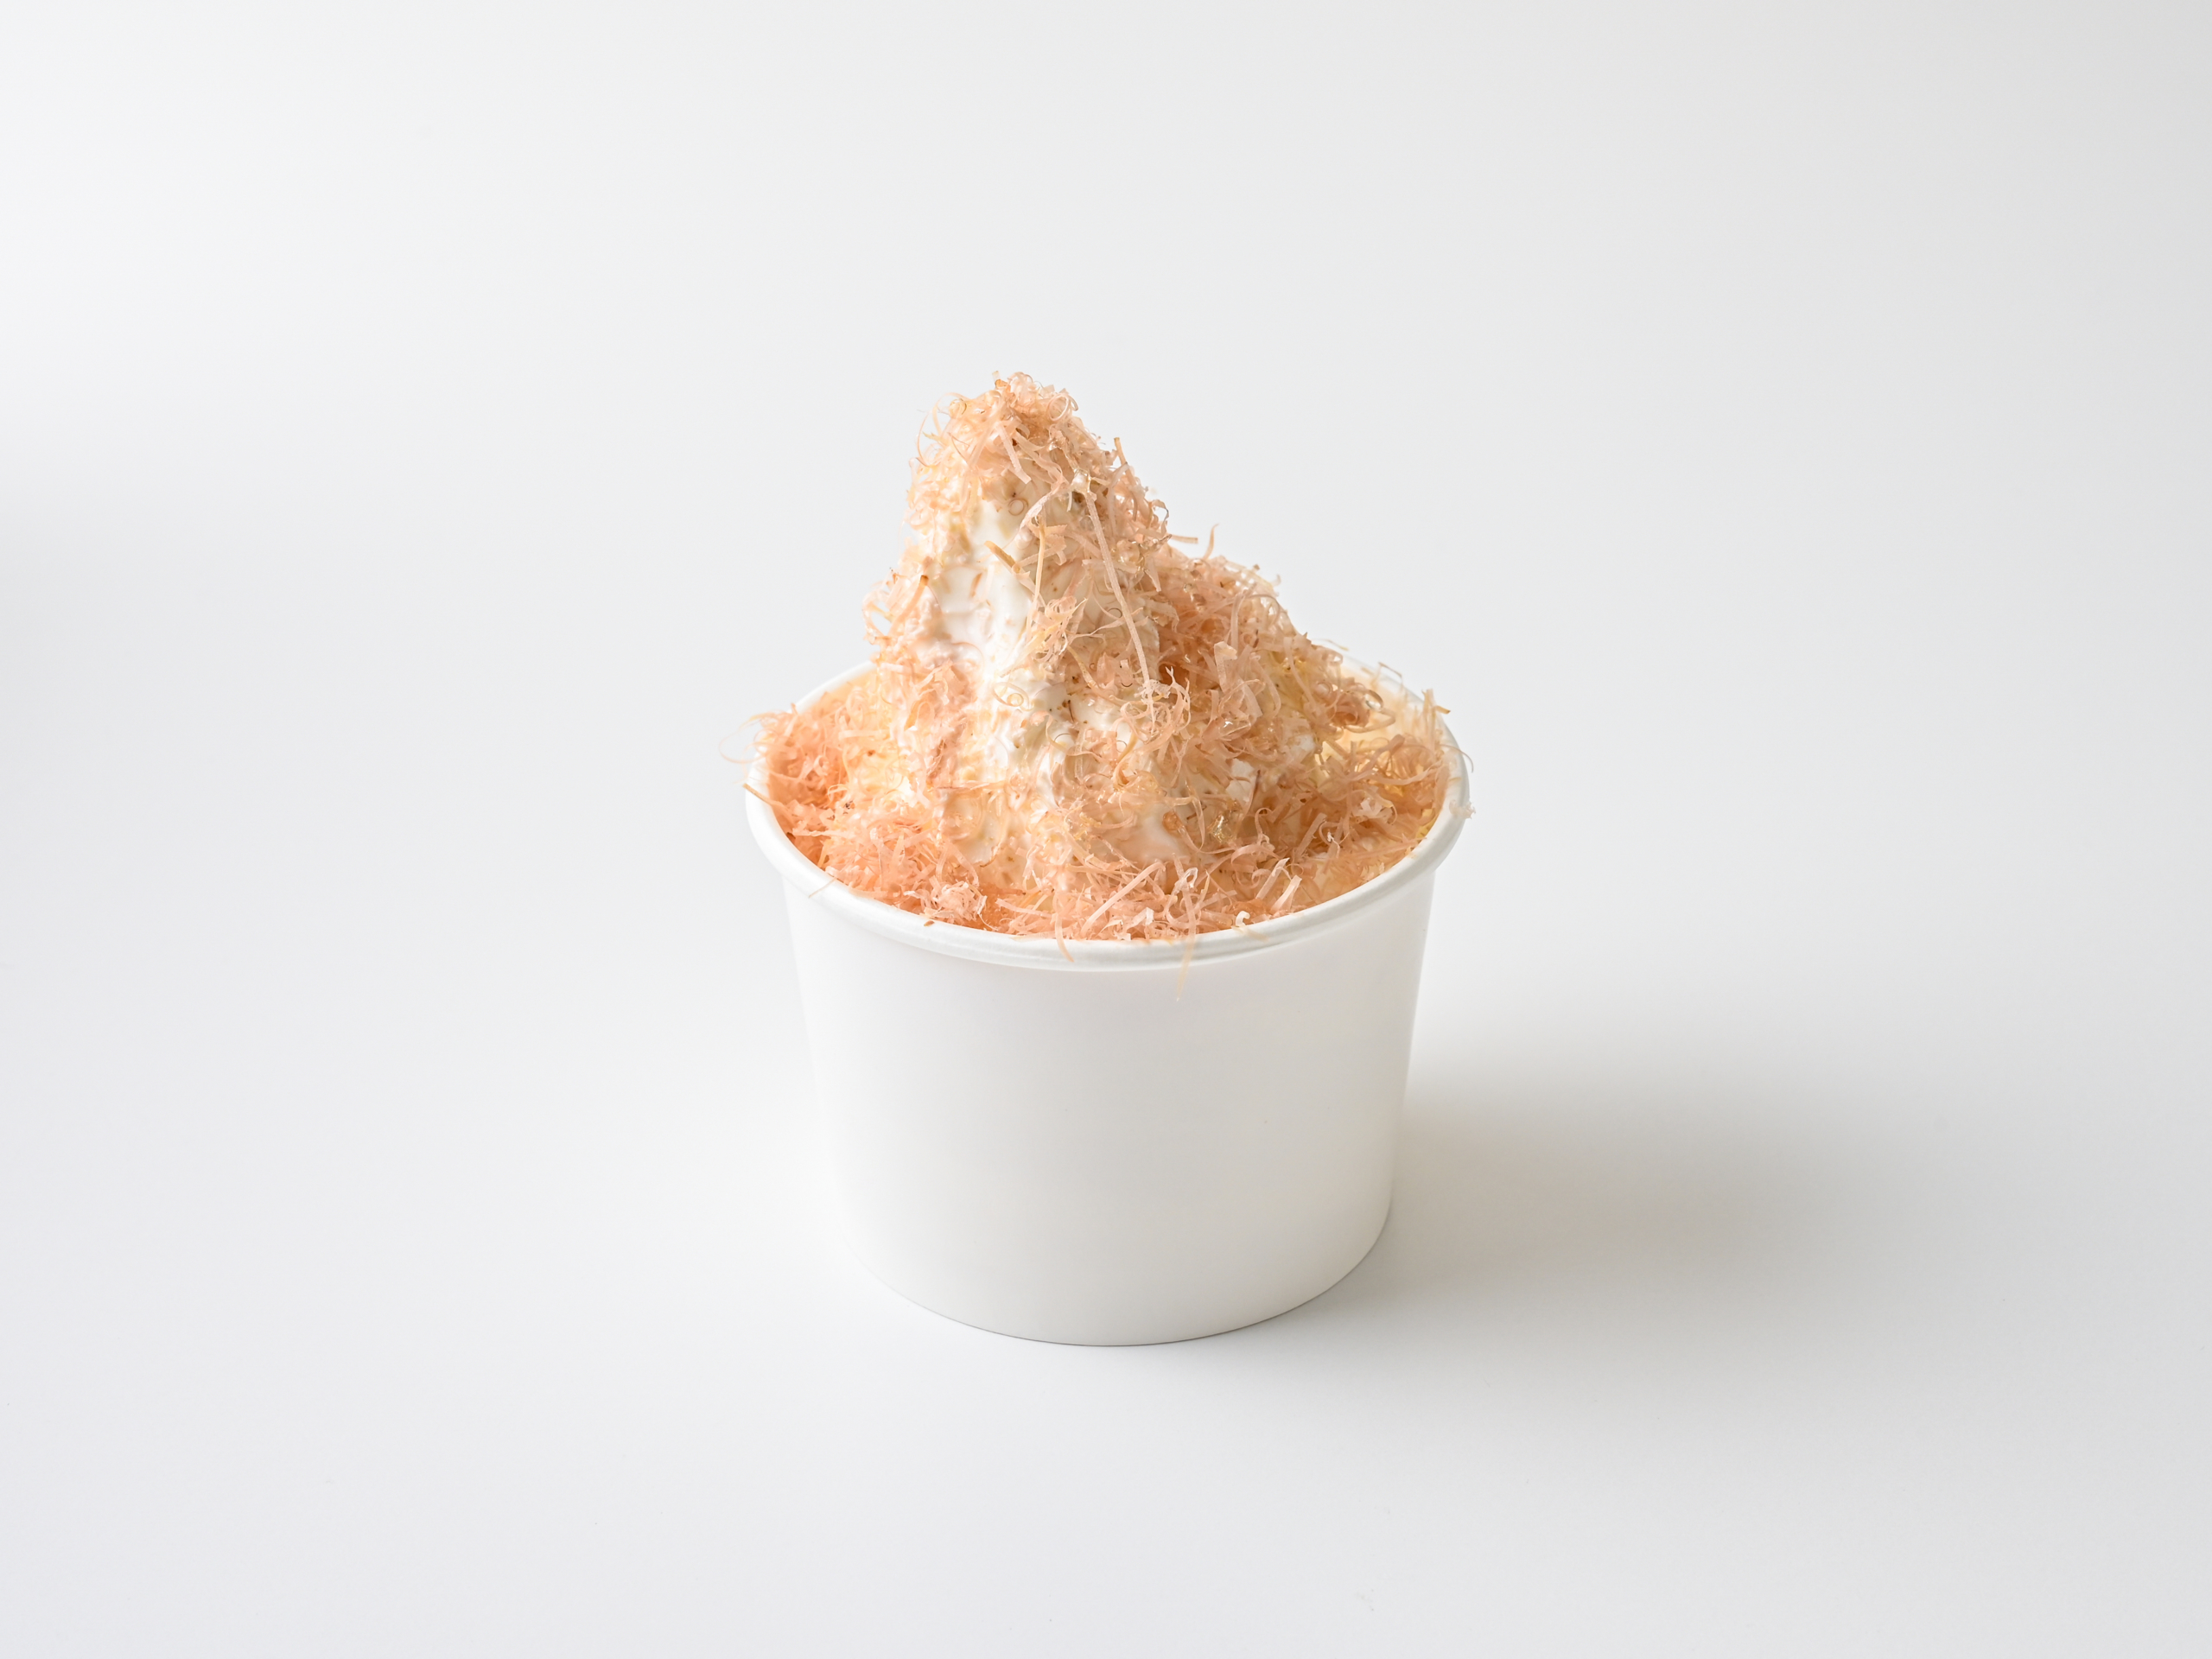 Eitaro Sohonpo – Limited-edition summer kakigori (Japanese-style shaved ice) made with first-rate ingredients, only available at their Nihonbashi Main Store cafe